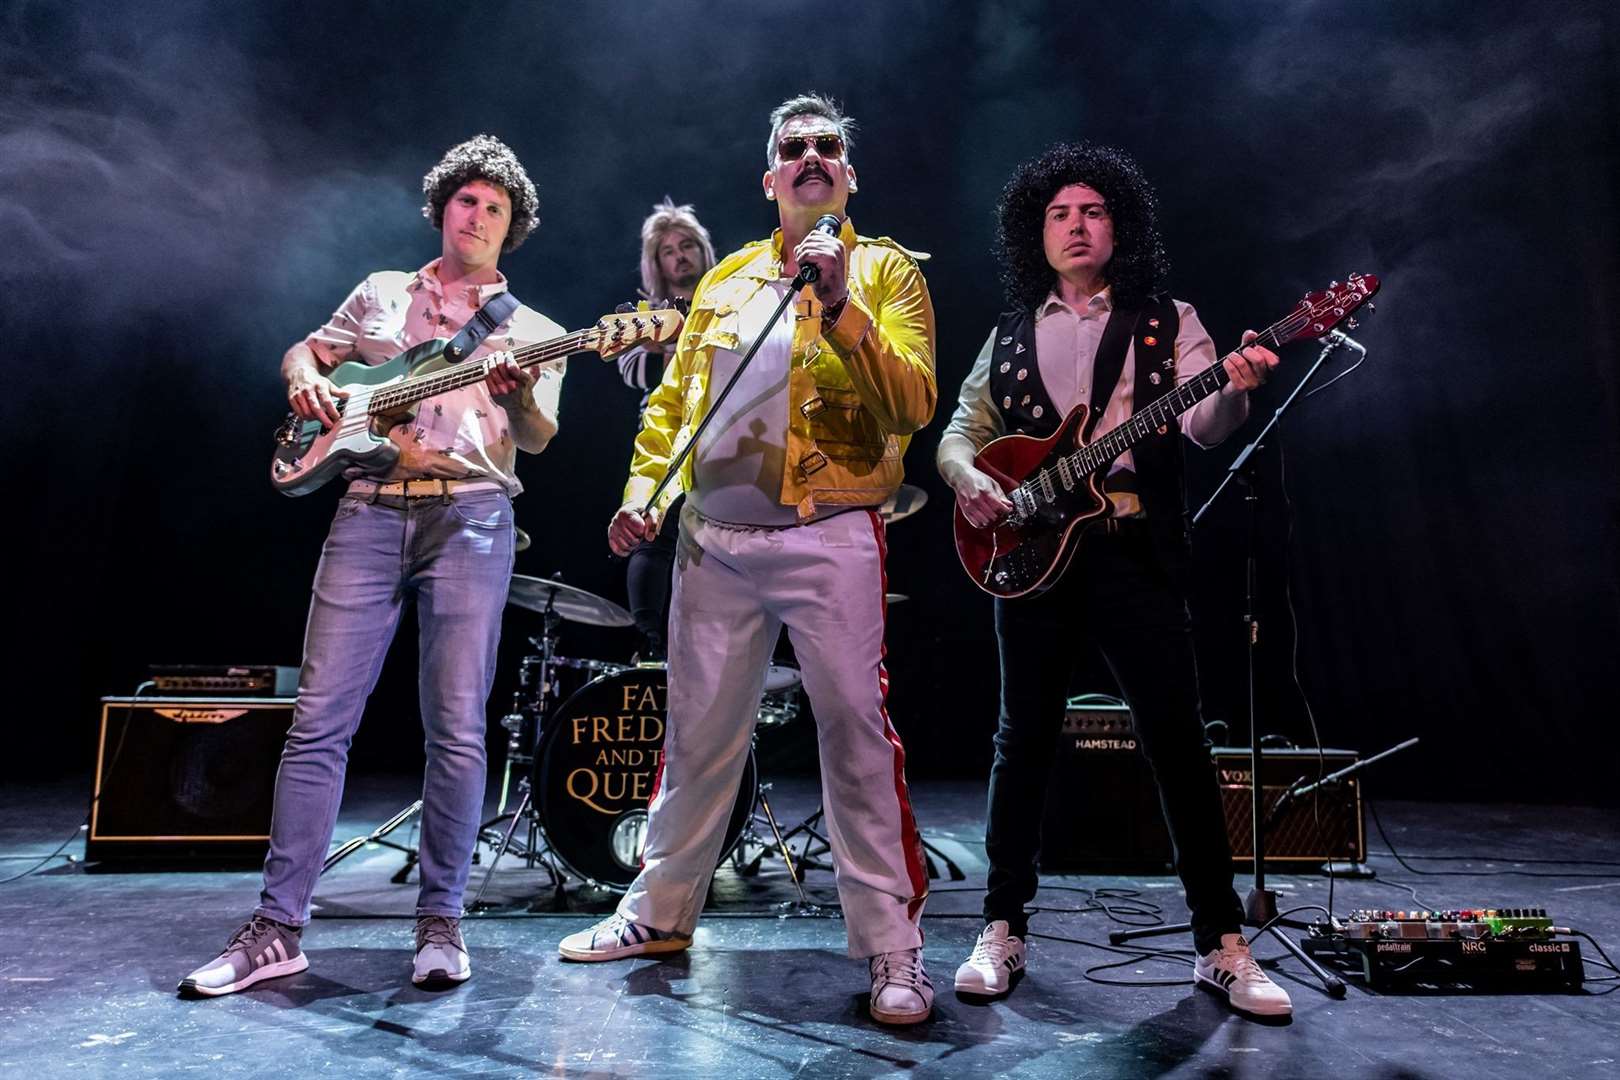 Fat Freddie and the Queens will be performing a tribute concert in Tunbridge Wells to kick off the bank holiday weekend. Picture: Facebook / Fat Freddie and the Queens